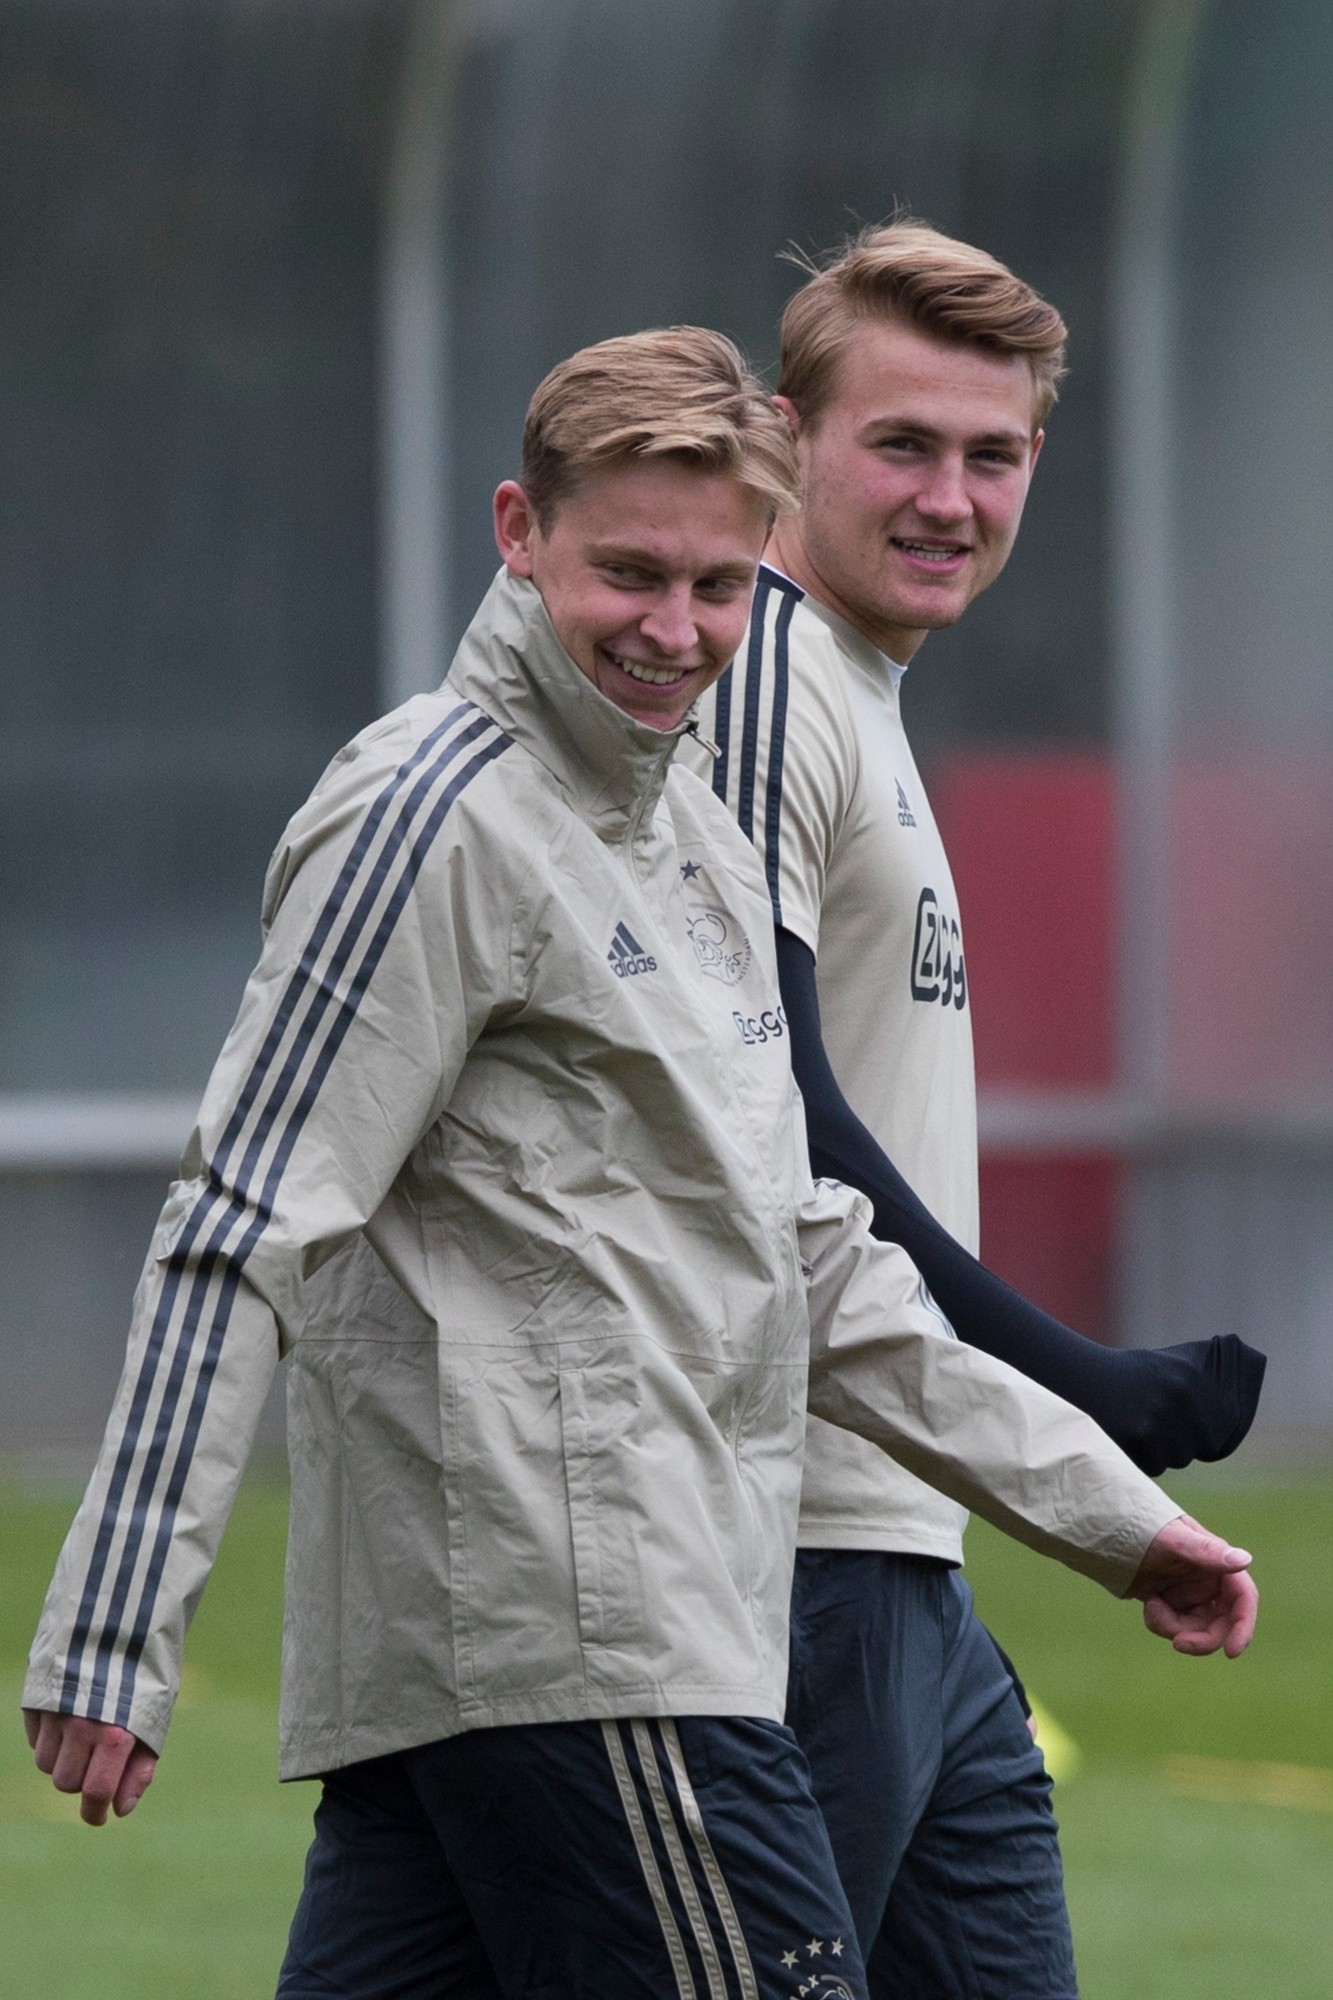 Ajax's Matthijs de Ligt, right, and Ajax's Frenkie de Jong talk during a training near the Johan Cruyff Arena in Amsterdam, Netherlands, Tuesday, May 7, 2019. Ajax will play Tottenham Hotspur in the Champions League semifinal, second leg, soccer match on Wednesday May 8, 2019. (AP Photo/) Netherlands Soccer Champions League